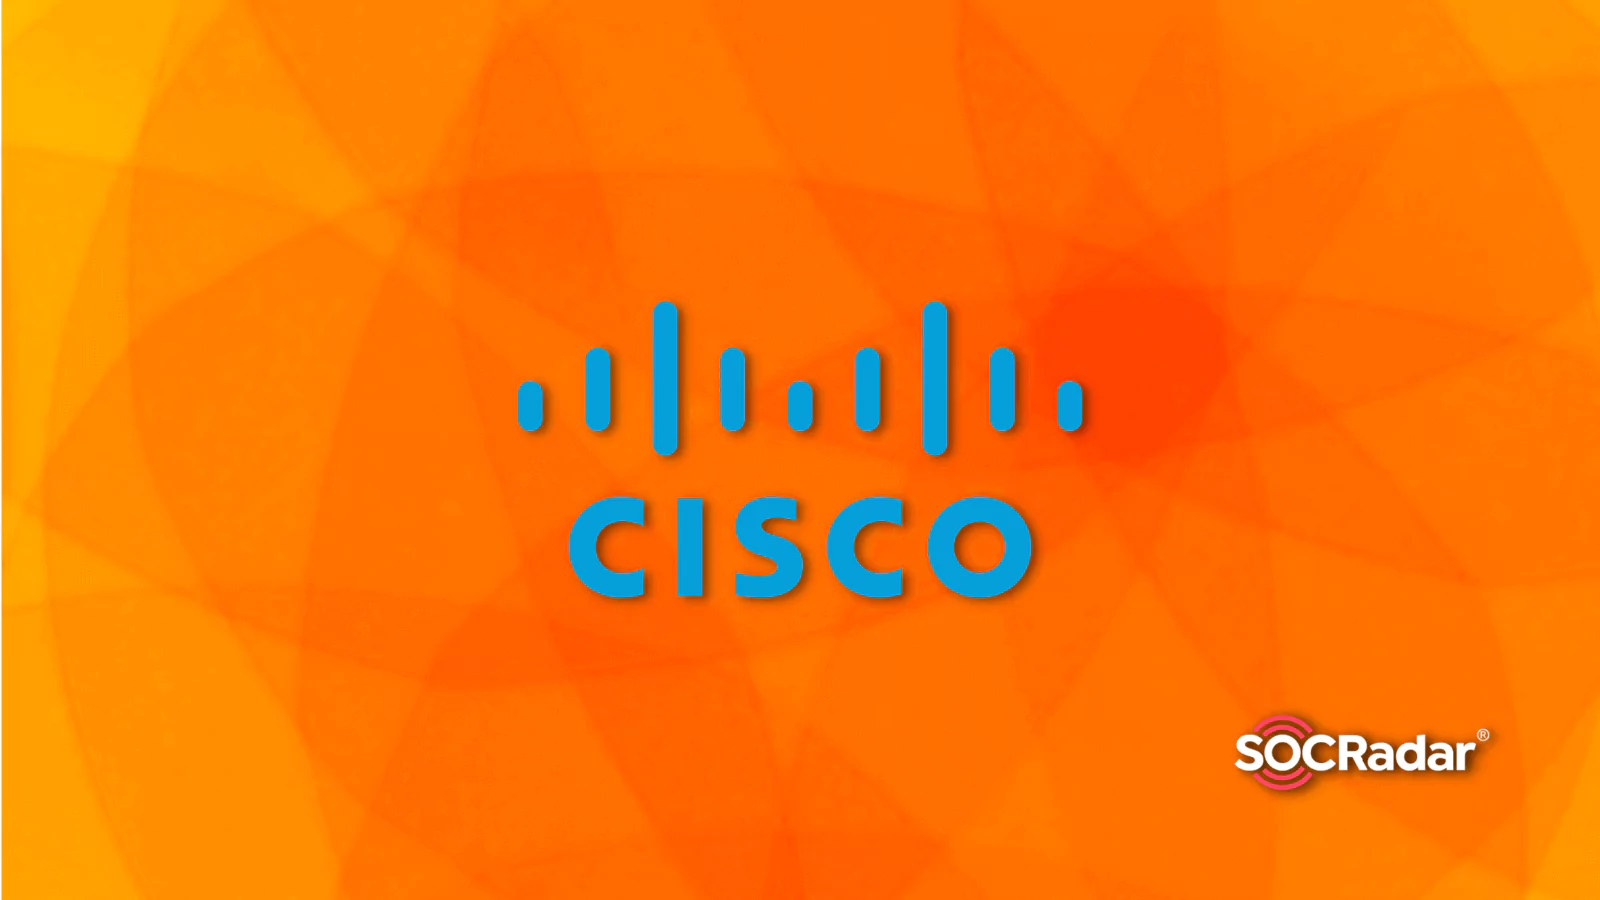 SOCRadar® Cyber Intelligence Inc. | Cisco Patched High Severity Vulnerabilities in Some Products